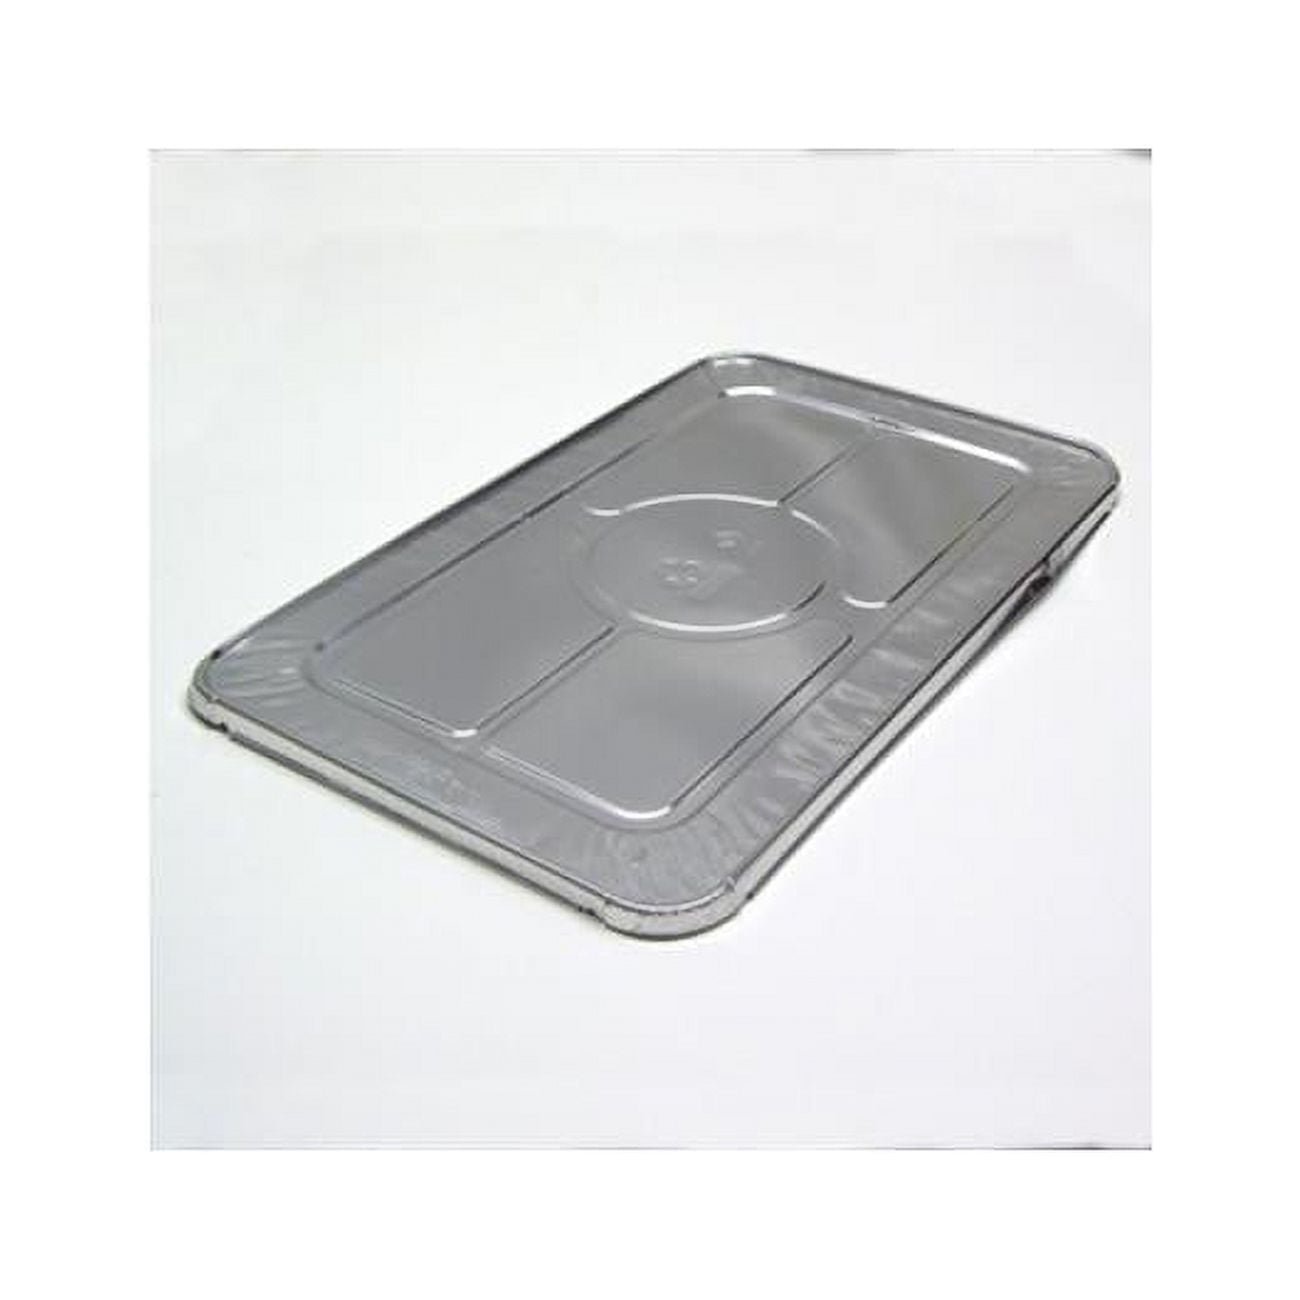 Y112045 Cpc Lid Or Cover For Full Size Aluminum Foil Pan - Case Of 80